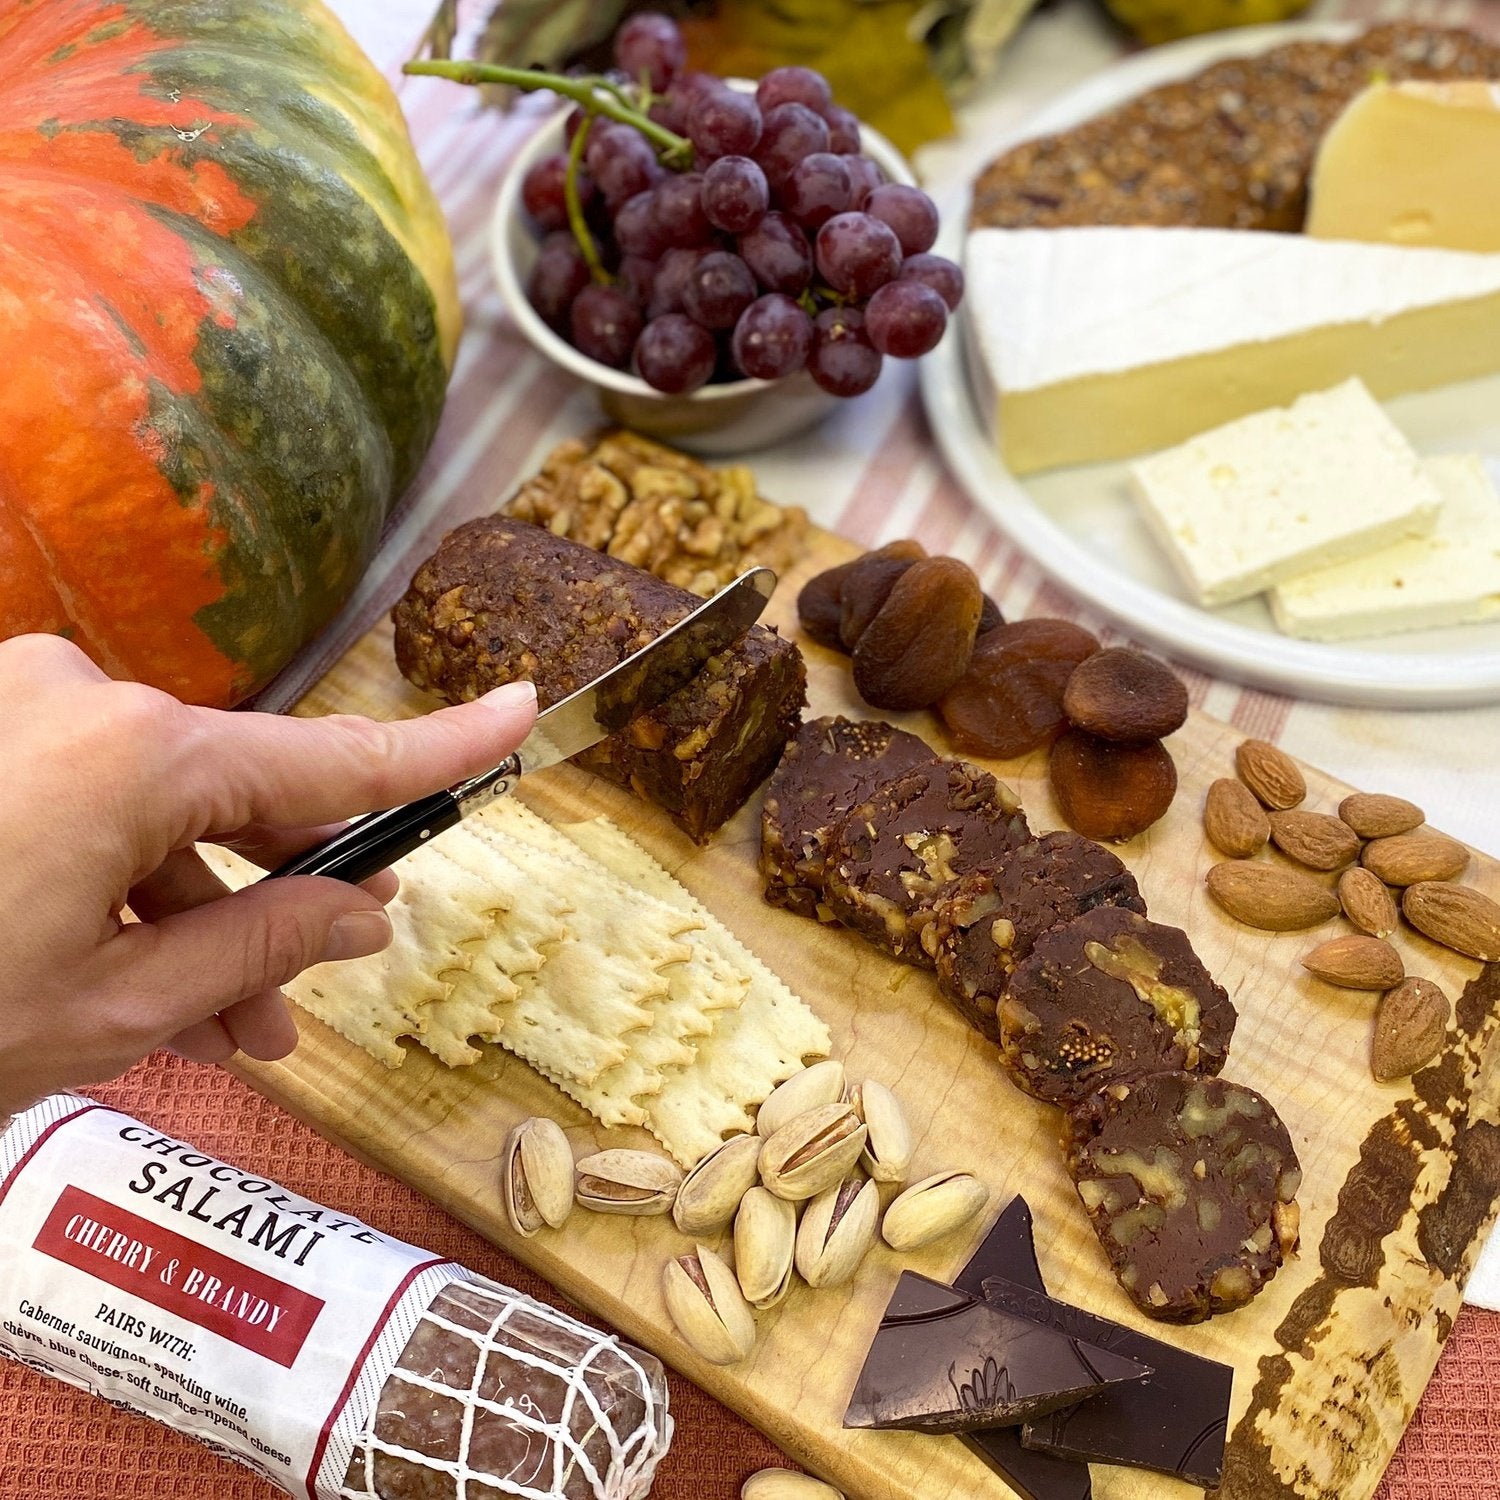 Cheese, fruit and sliced chocolate salami spread on a wood cutting board.